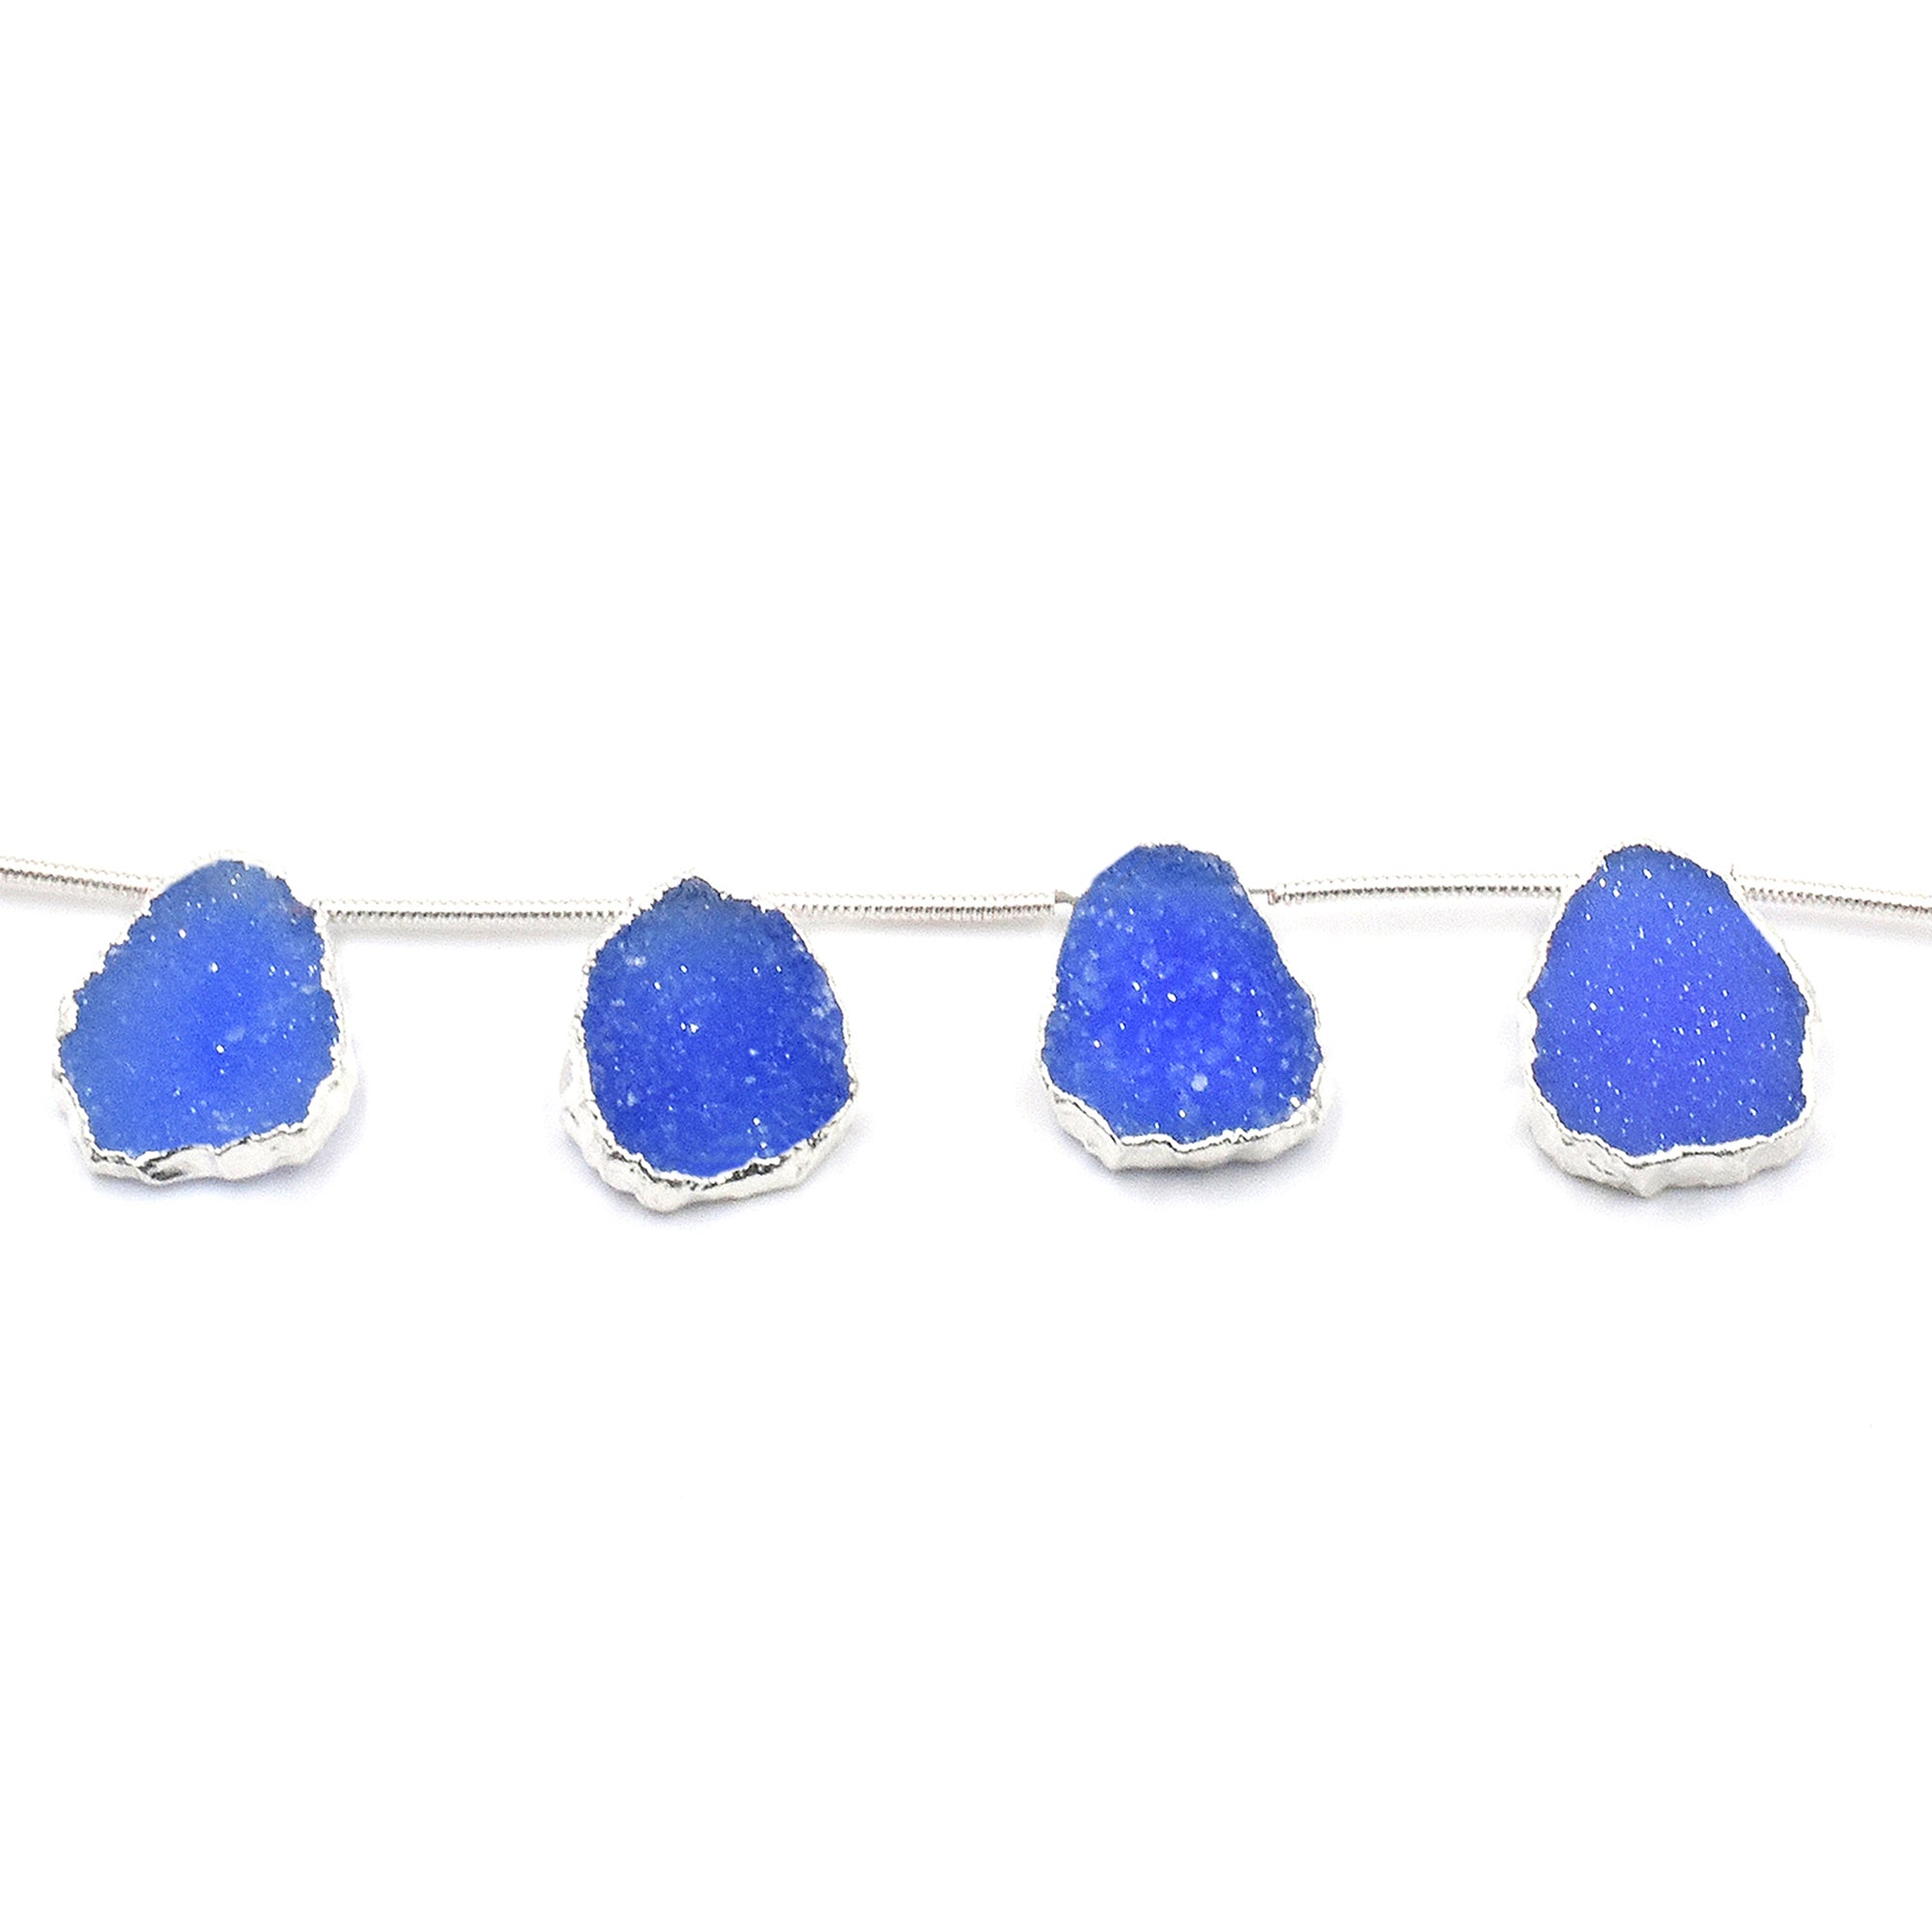 Blue Druzy 15X11 MM Uneven Shape Side Drilled Rhodium Electroplated Strand